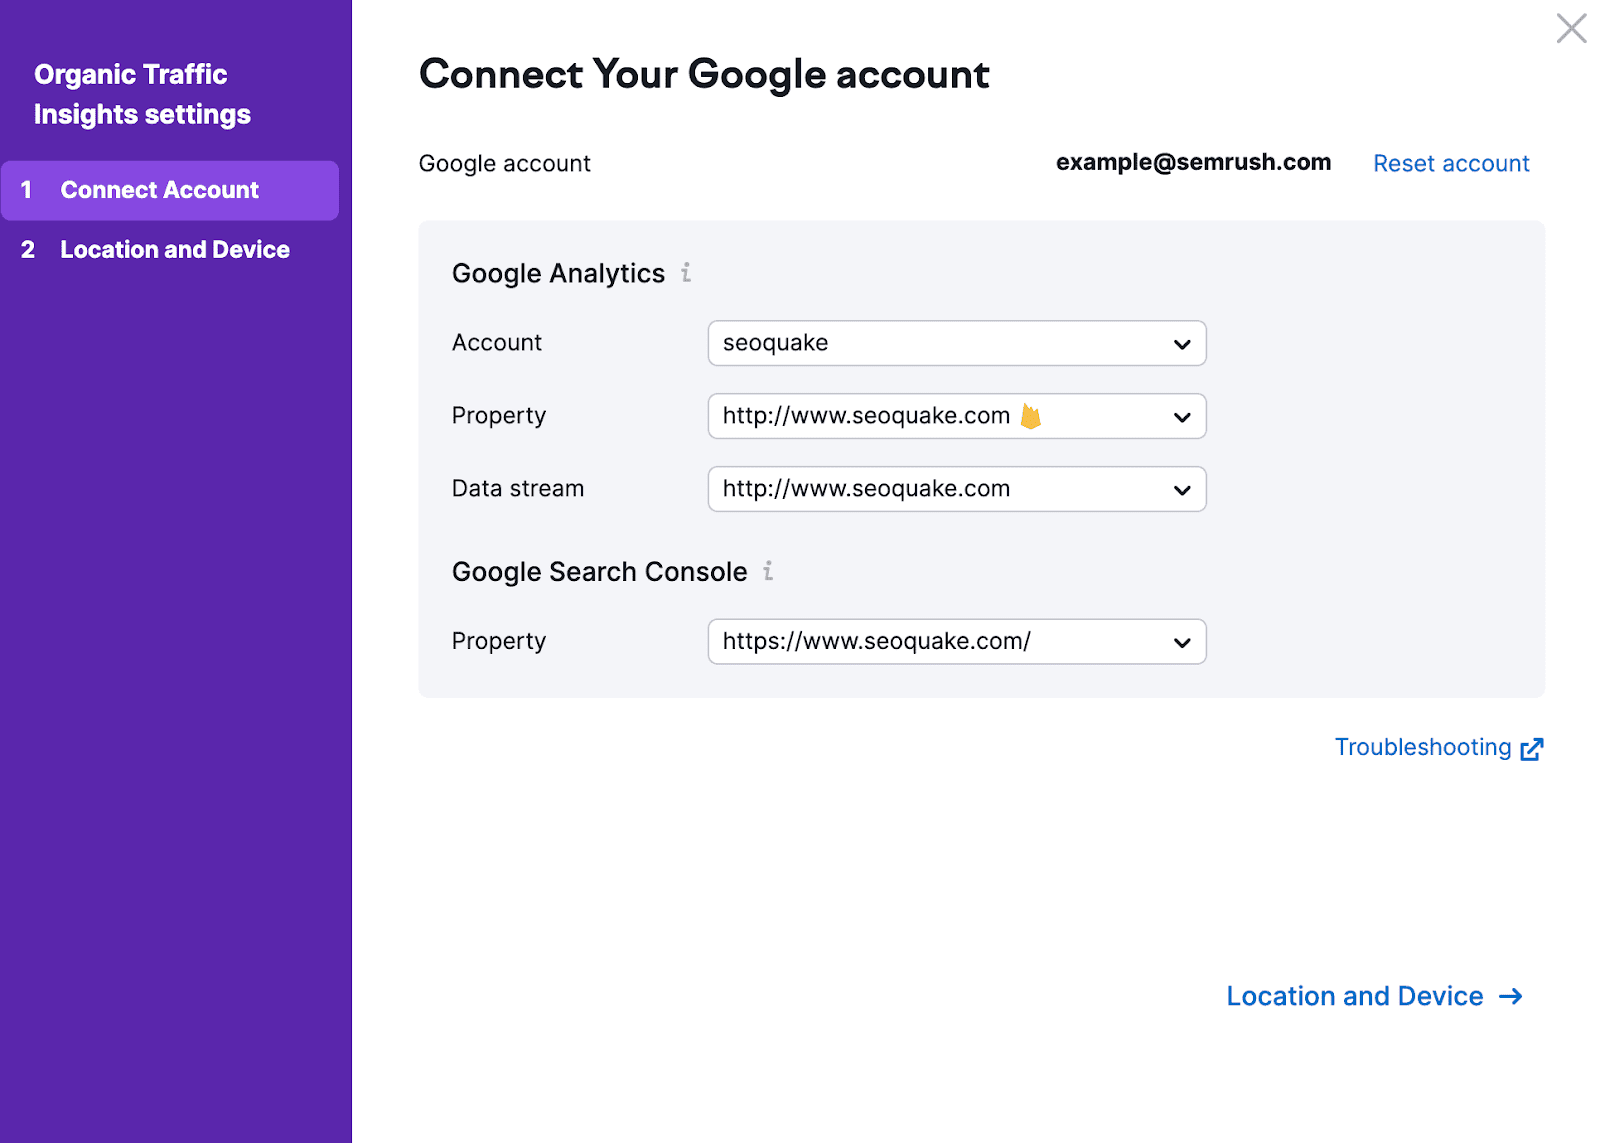 "Connect Your Google account" window in Organic Traffic Insights settings